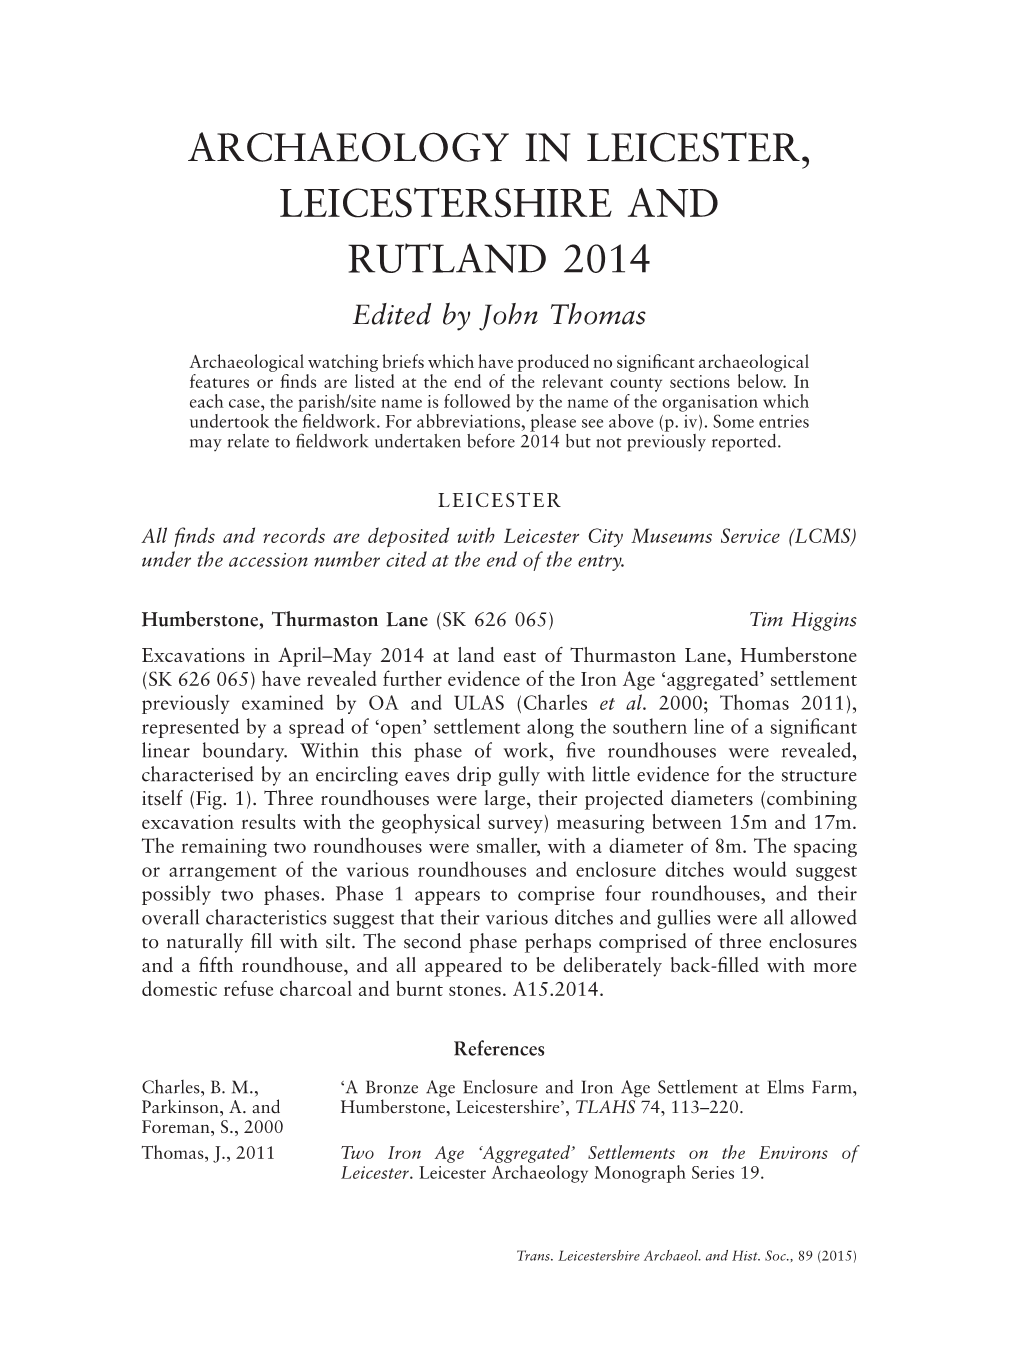 ARCHAEOLOGY in LEICESTER, LEICESTERSHIRE and RUTLAND 2014 Edited by John Thomas